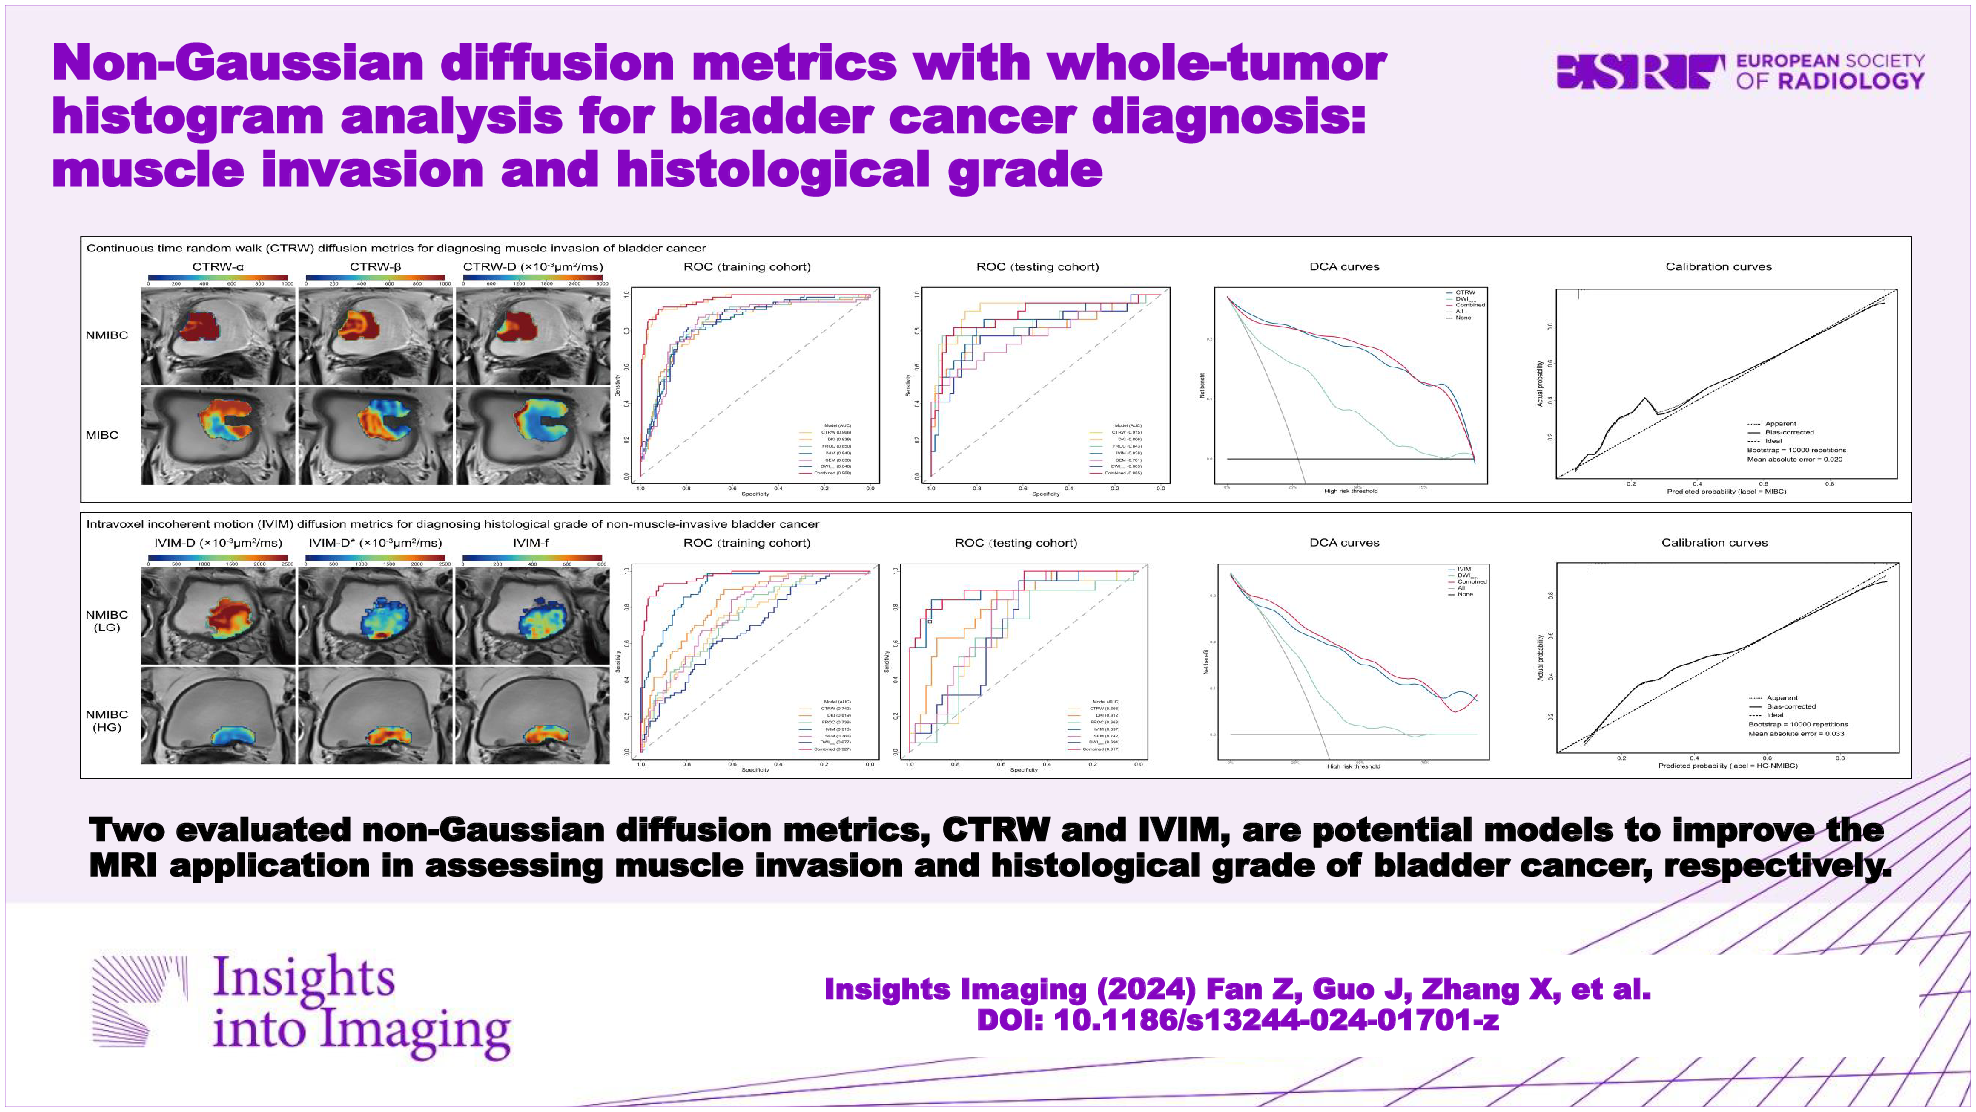 Non-Gaussian diffusion metrics with whole-tumor histogram analysis for bladder cancer diagnosis: muscle invasion and histological grade